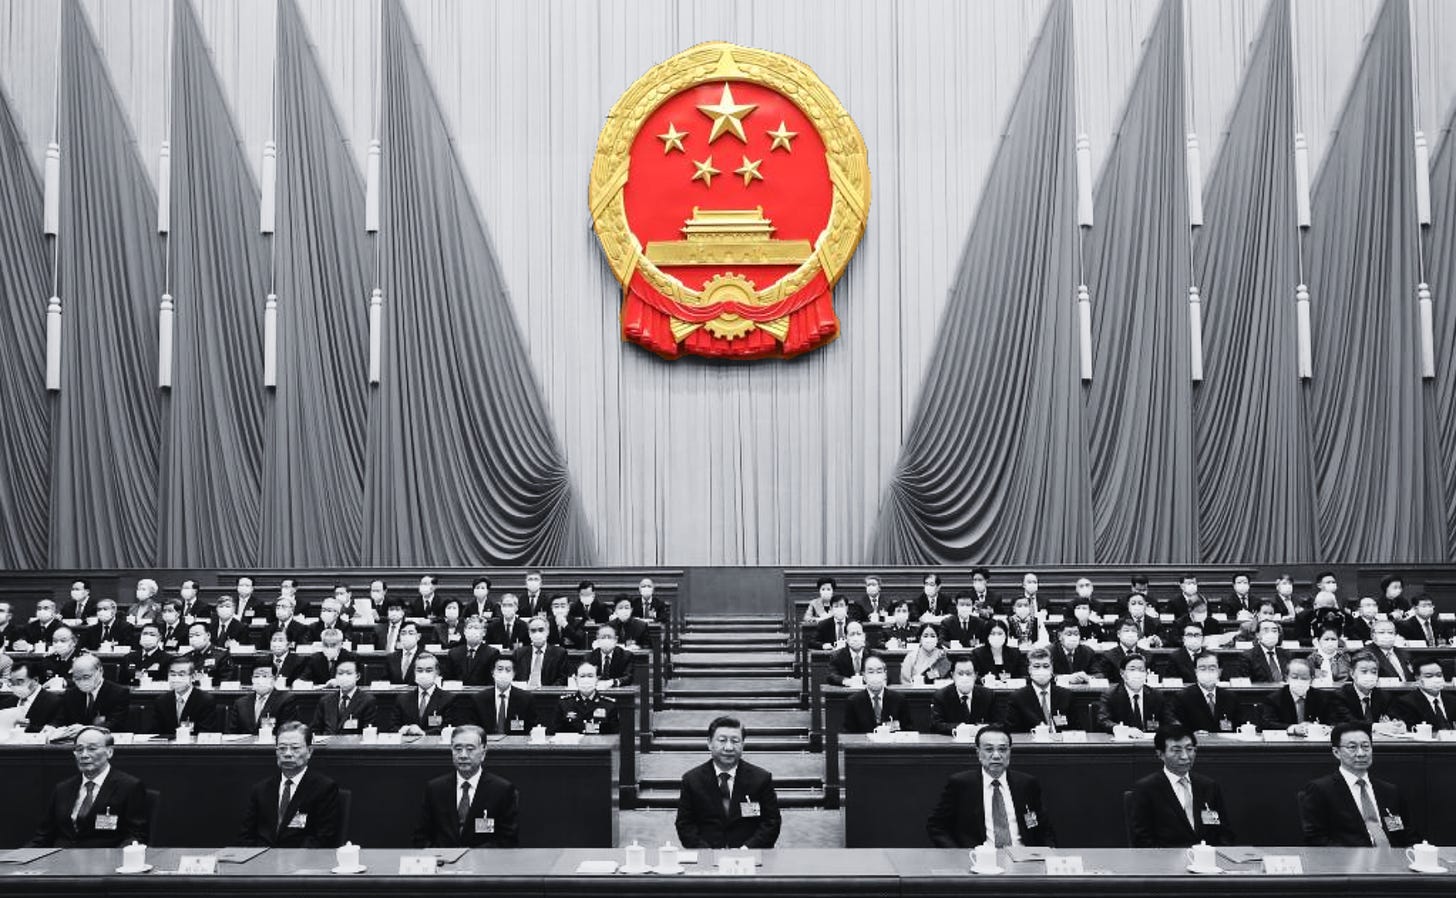 Xi Jinping sitting at the center of the National People's Congress in 2022 in black and white with the National Congress seal in bright red and gold over the meeting